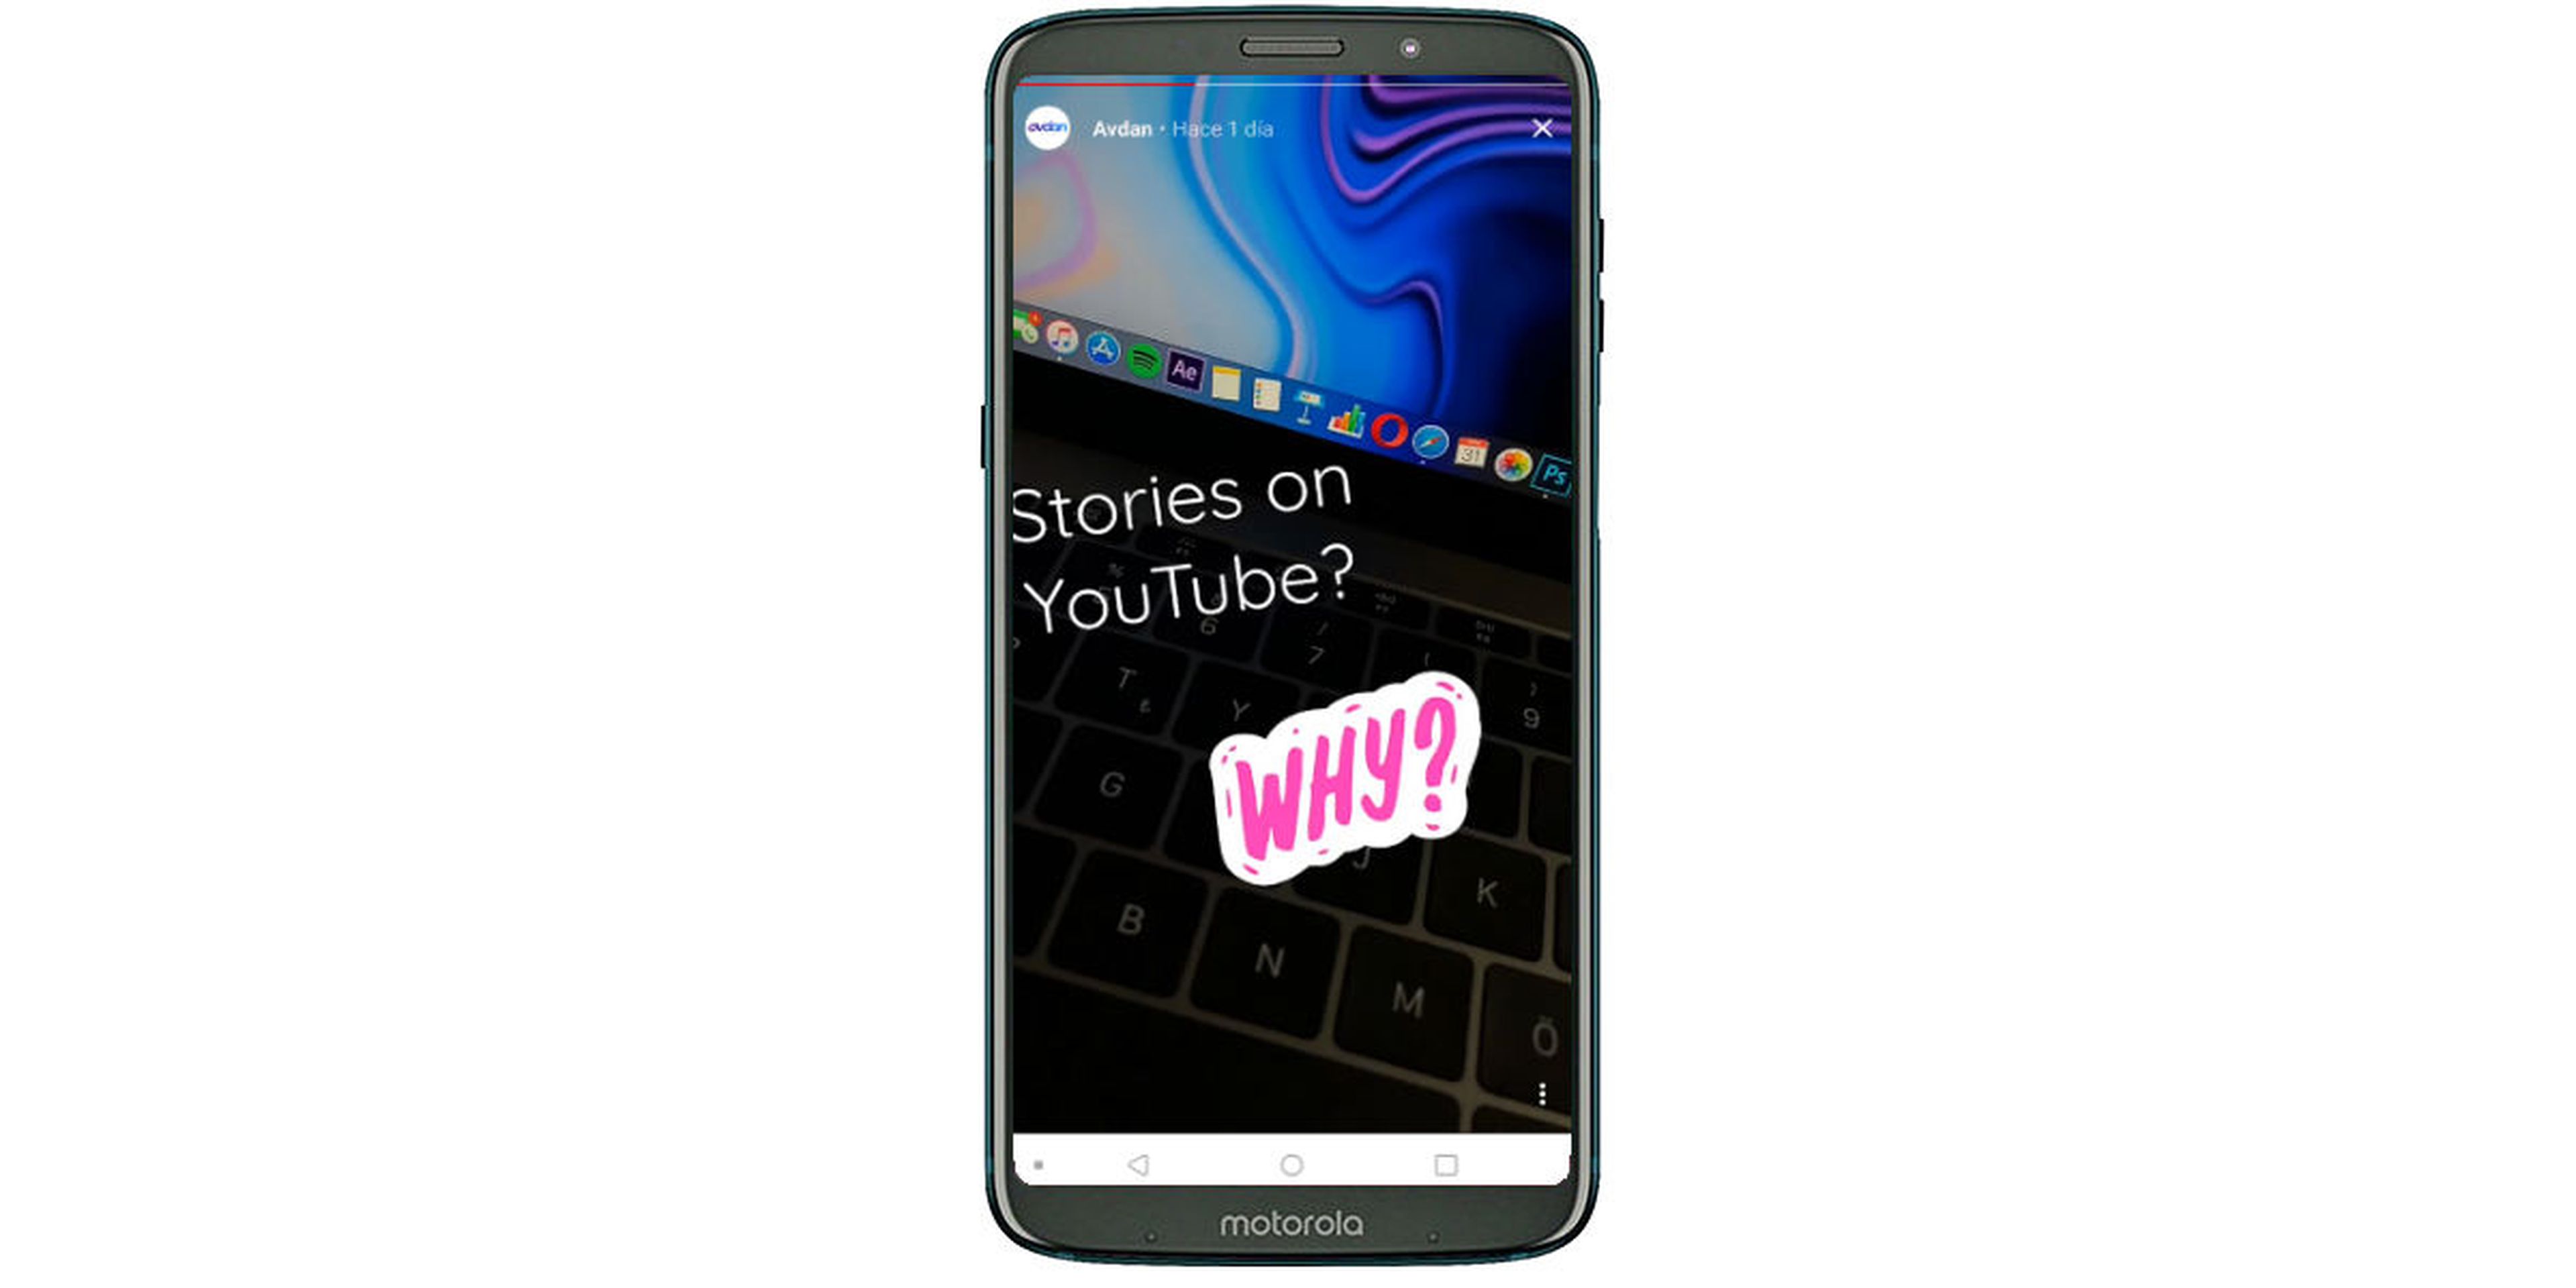 YouTube Stories